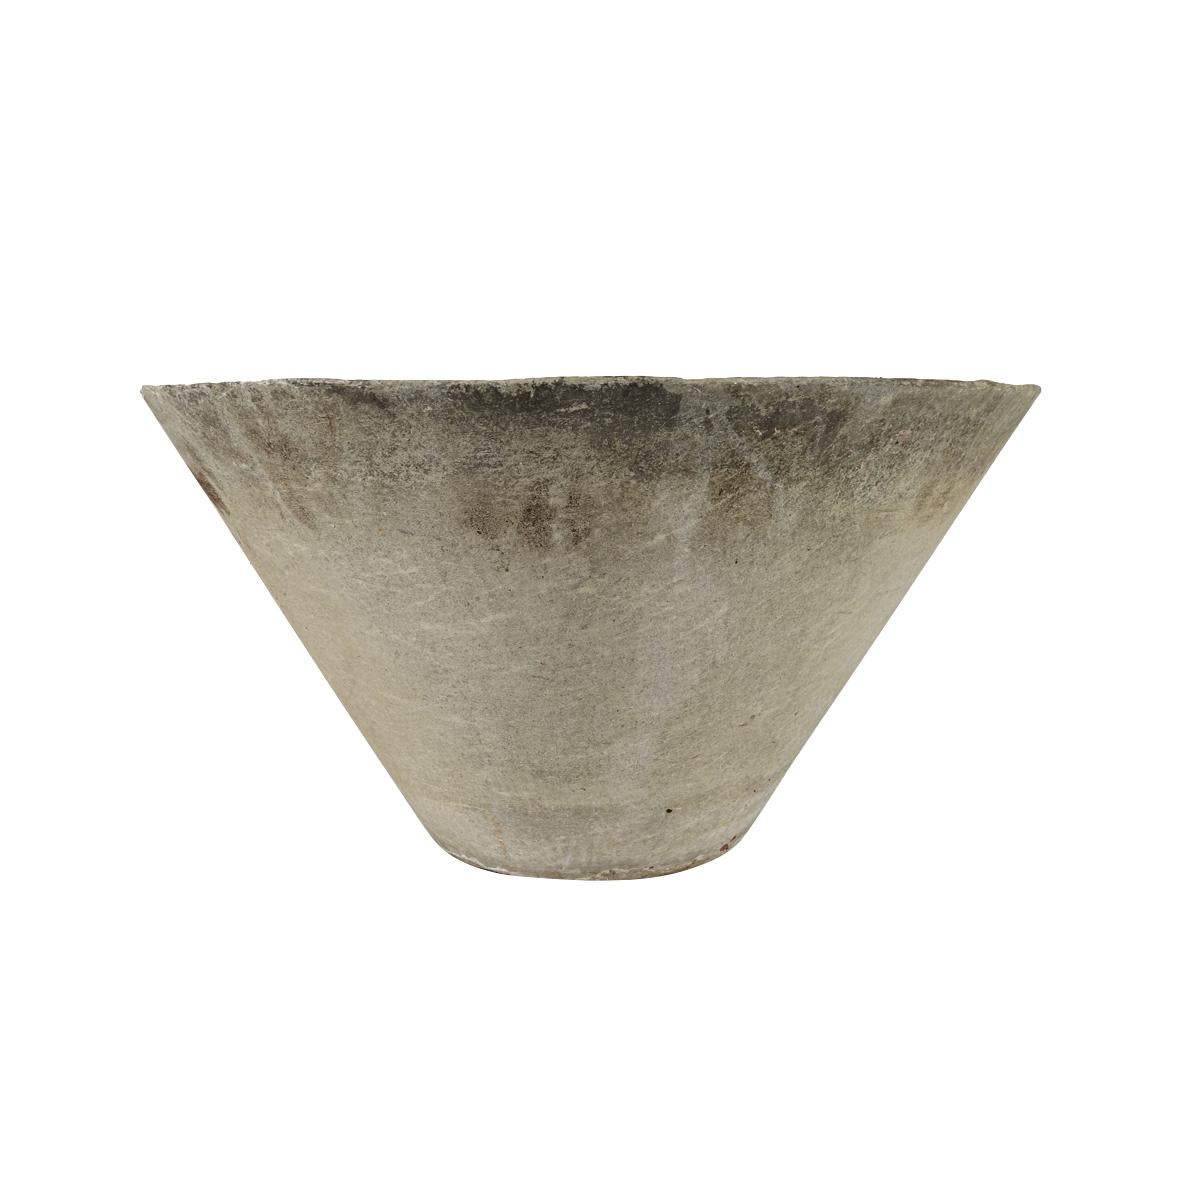 Swiss Mid-Century Modern Conical Shaped Planter by Willy Guhl for Eternit For Sale